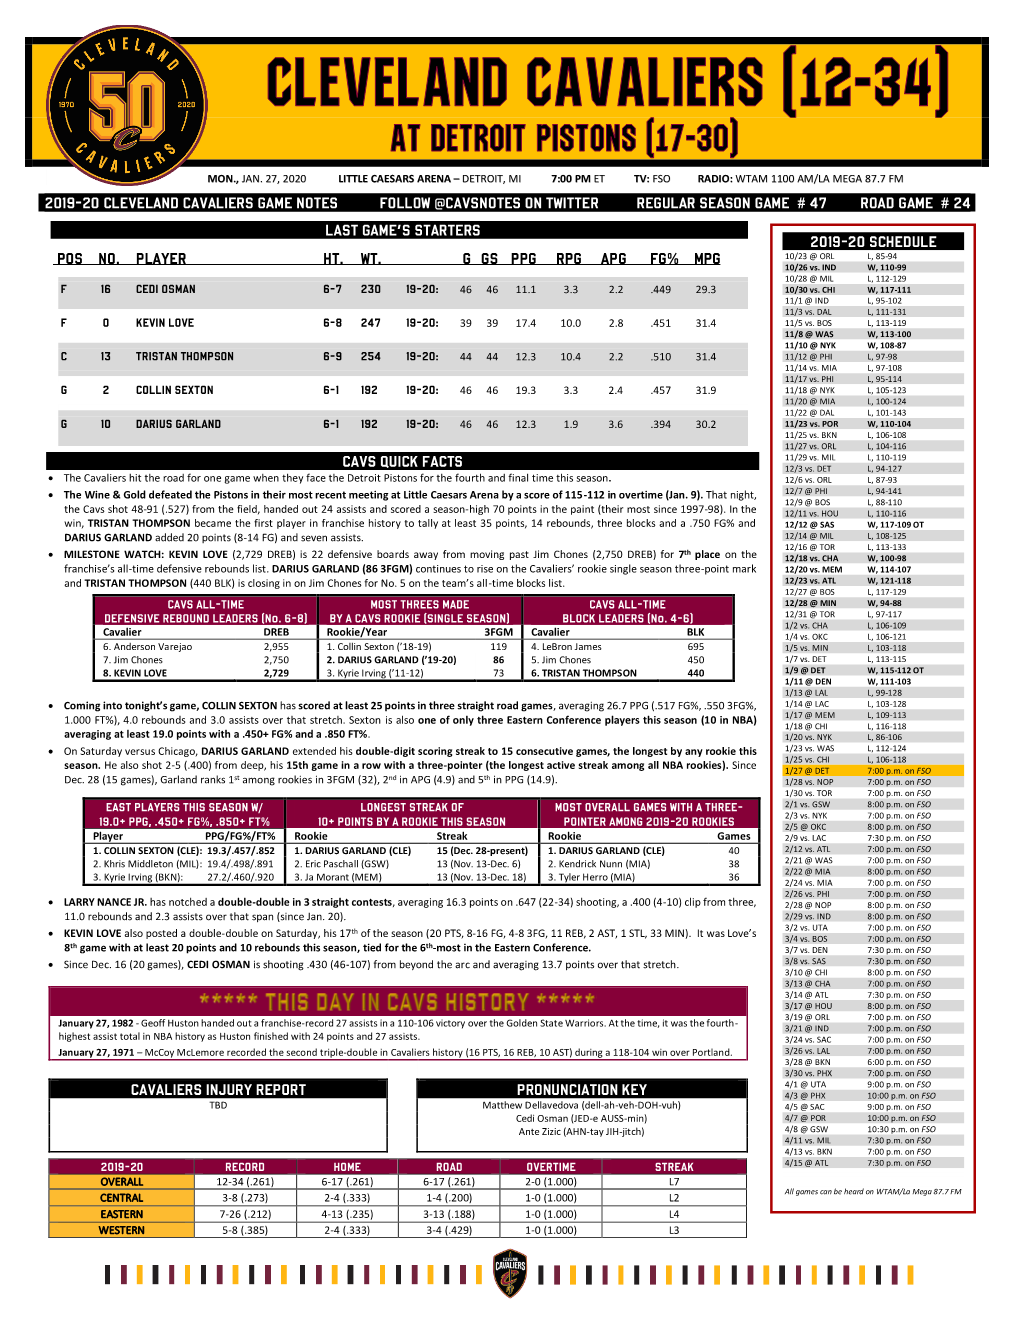 2019-20 Cleveland Cavaliers Game Notes Follow @Cavsnotes on Twitter Regular Season Game # 47 Road Game # 24